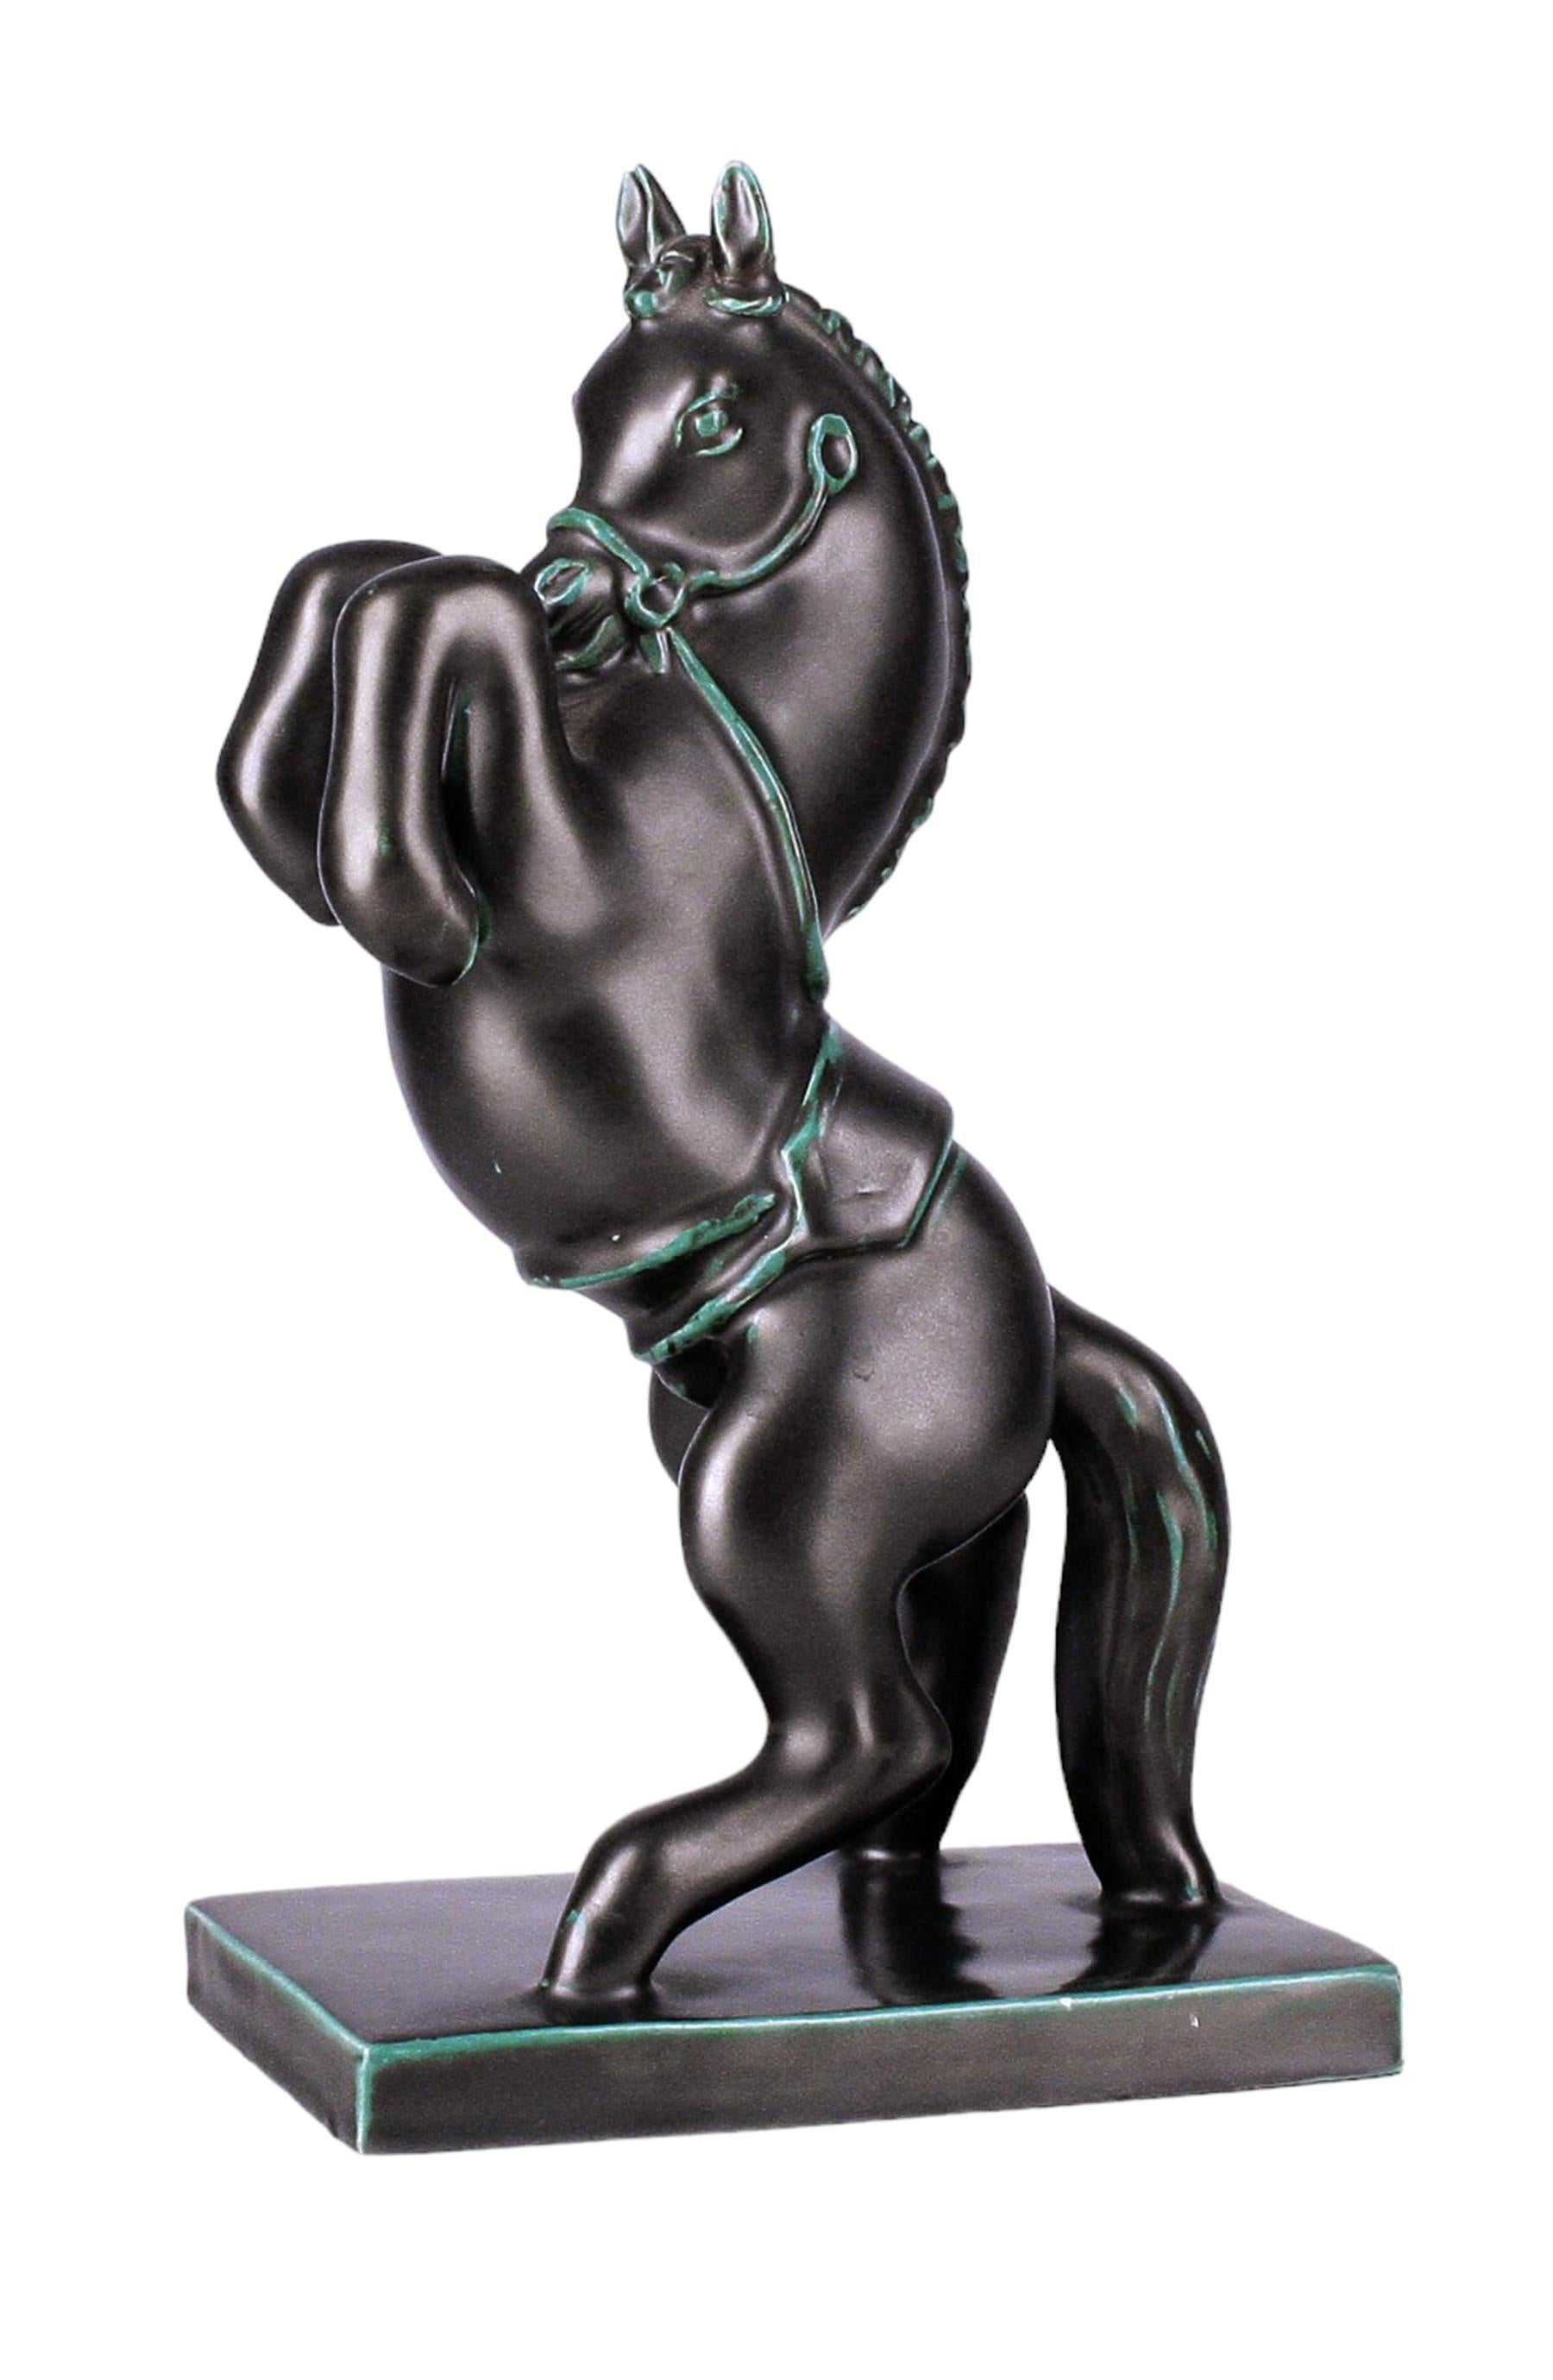 Mid-20th century Modern italian glazed black ceramic rearing horse sculpture by Ugo Zaccagnini & Figli

By: Ugo Zaccagnini & Figli
Material: ceramic, paint
Technique: pressed, molded, painted, hand-painted, hand-crafted, glazed
Dimensions: 4.5 in x